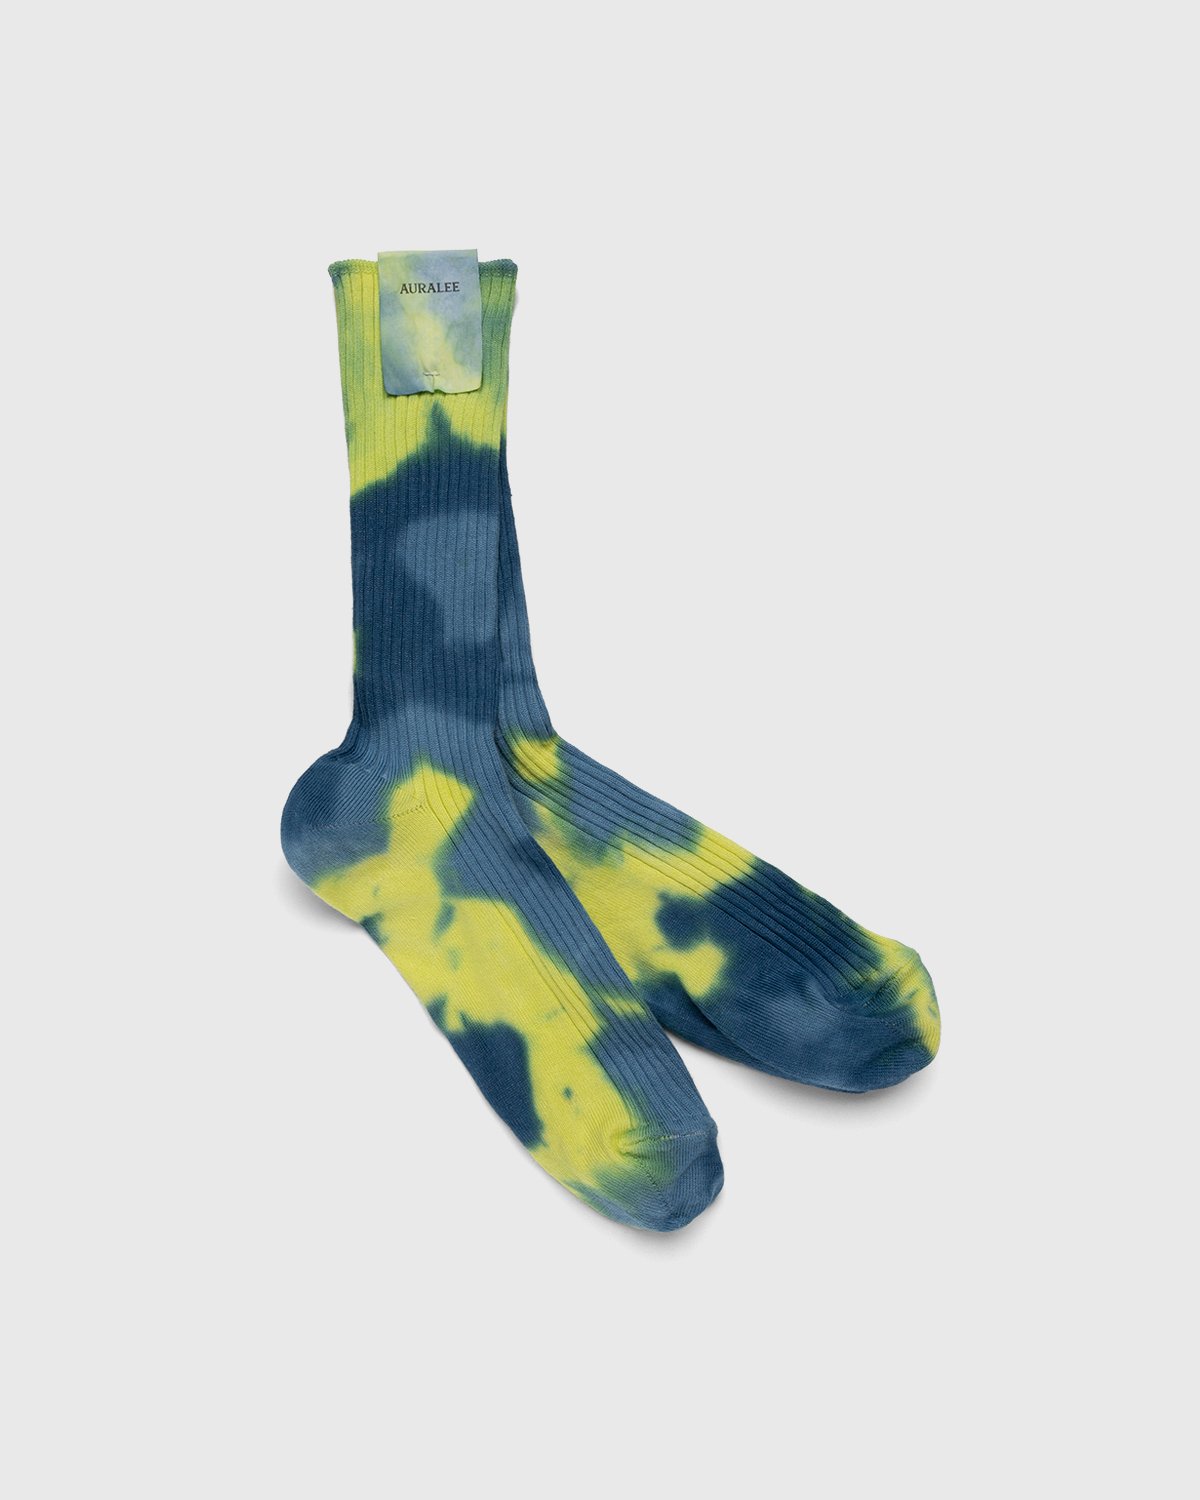 Auralee - Giza Cotton Dyed Socks BLUE YELLOW DYE - Accessories - Blue - Image 1